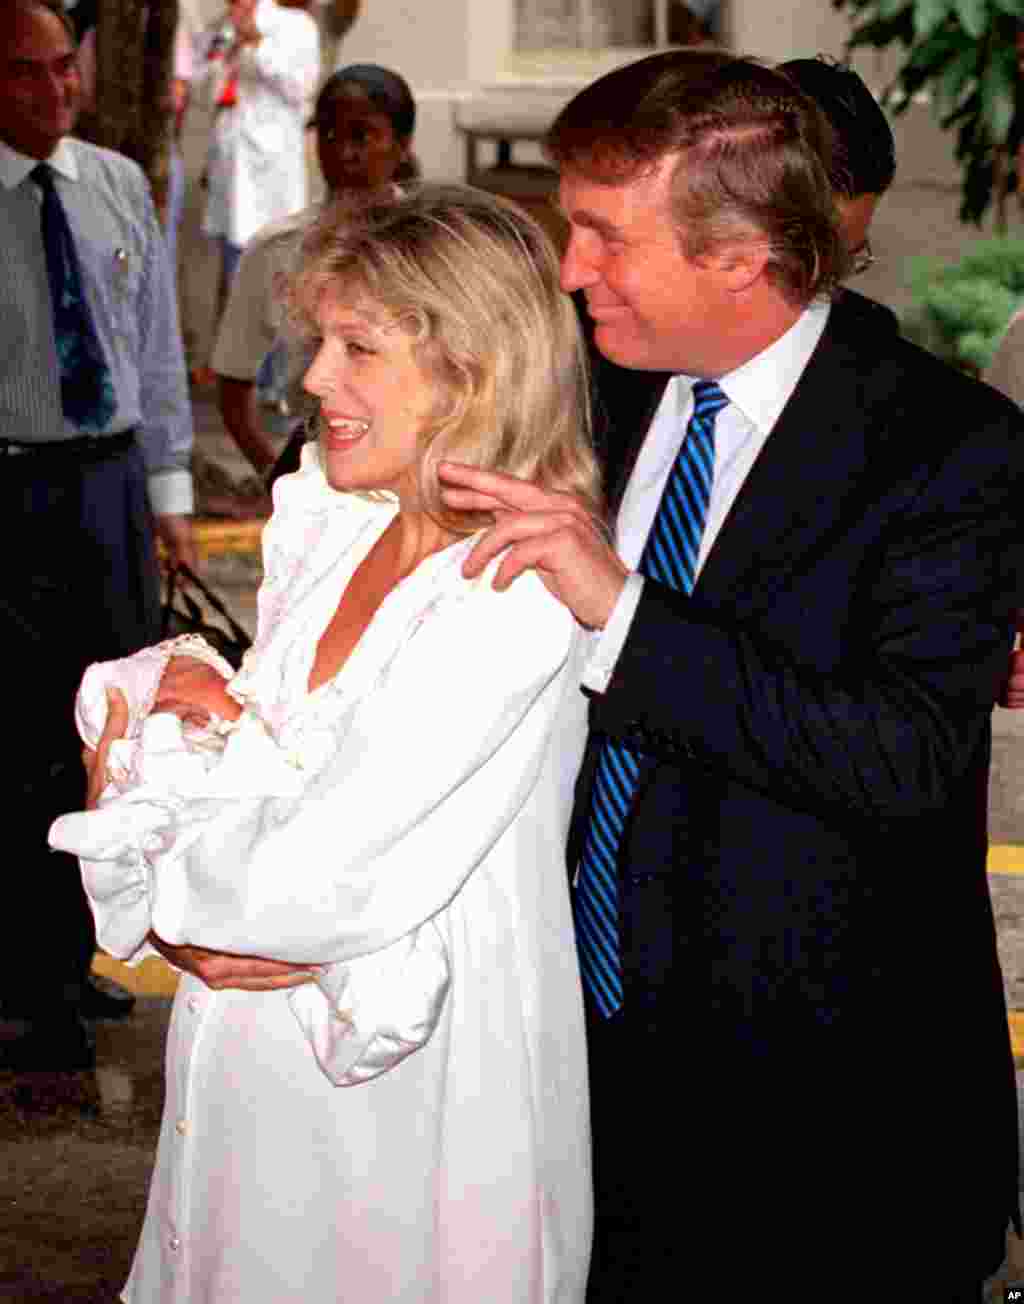 Happy parents Marla Maples, left, and Donald Trump greet the press with their newborn daughter, Tiffany, as they leave St. Mary's Hospital in West Palm Beach, Fla., on Thurs., Oct. 14, 1993. (AP Photo/Hans Deryk)